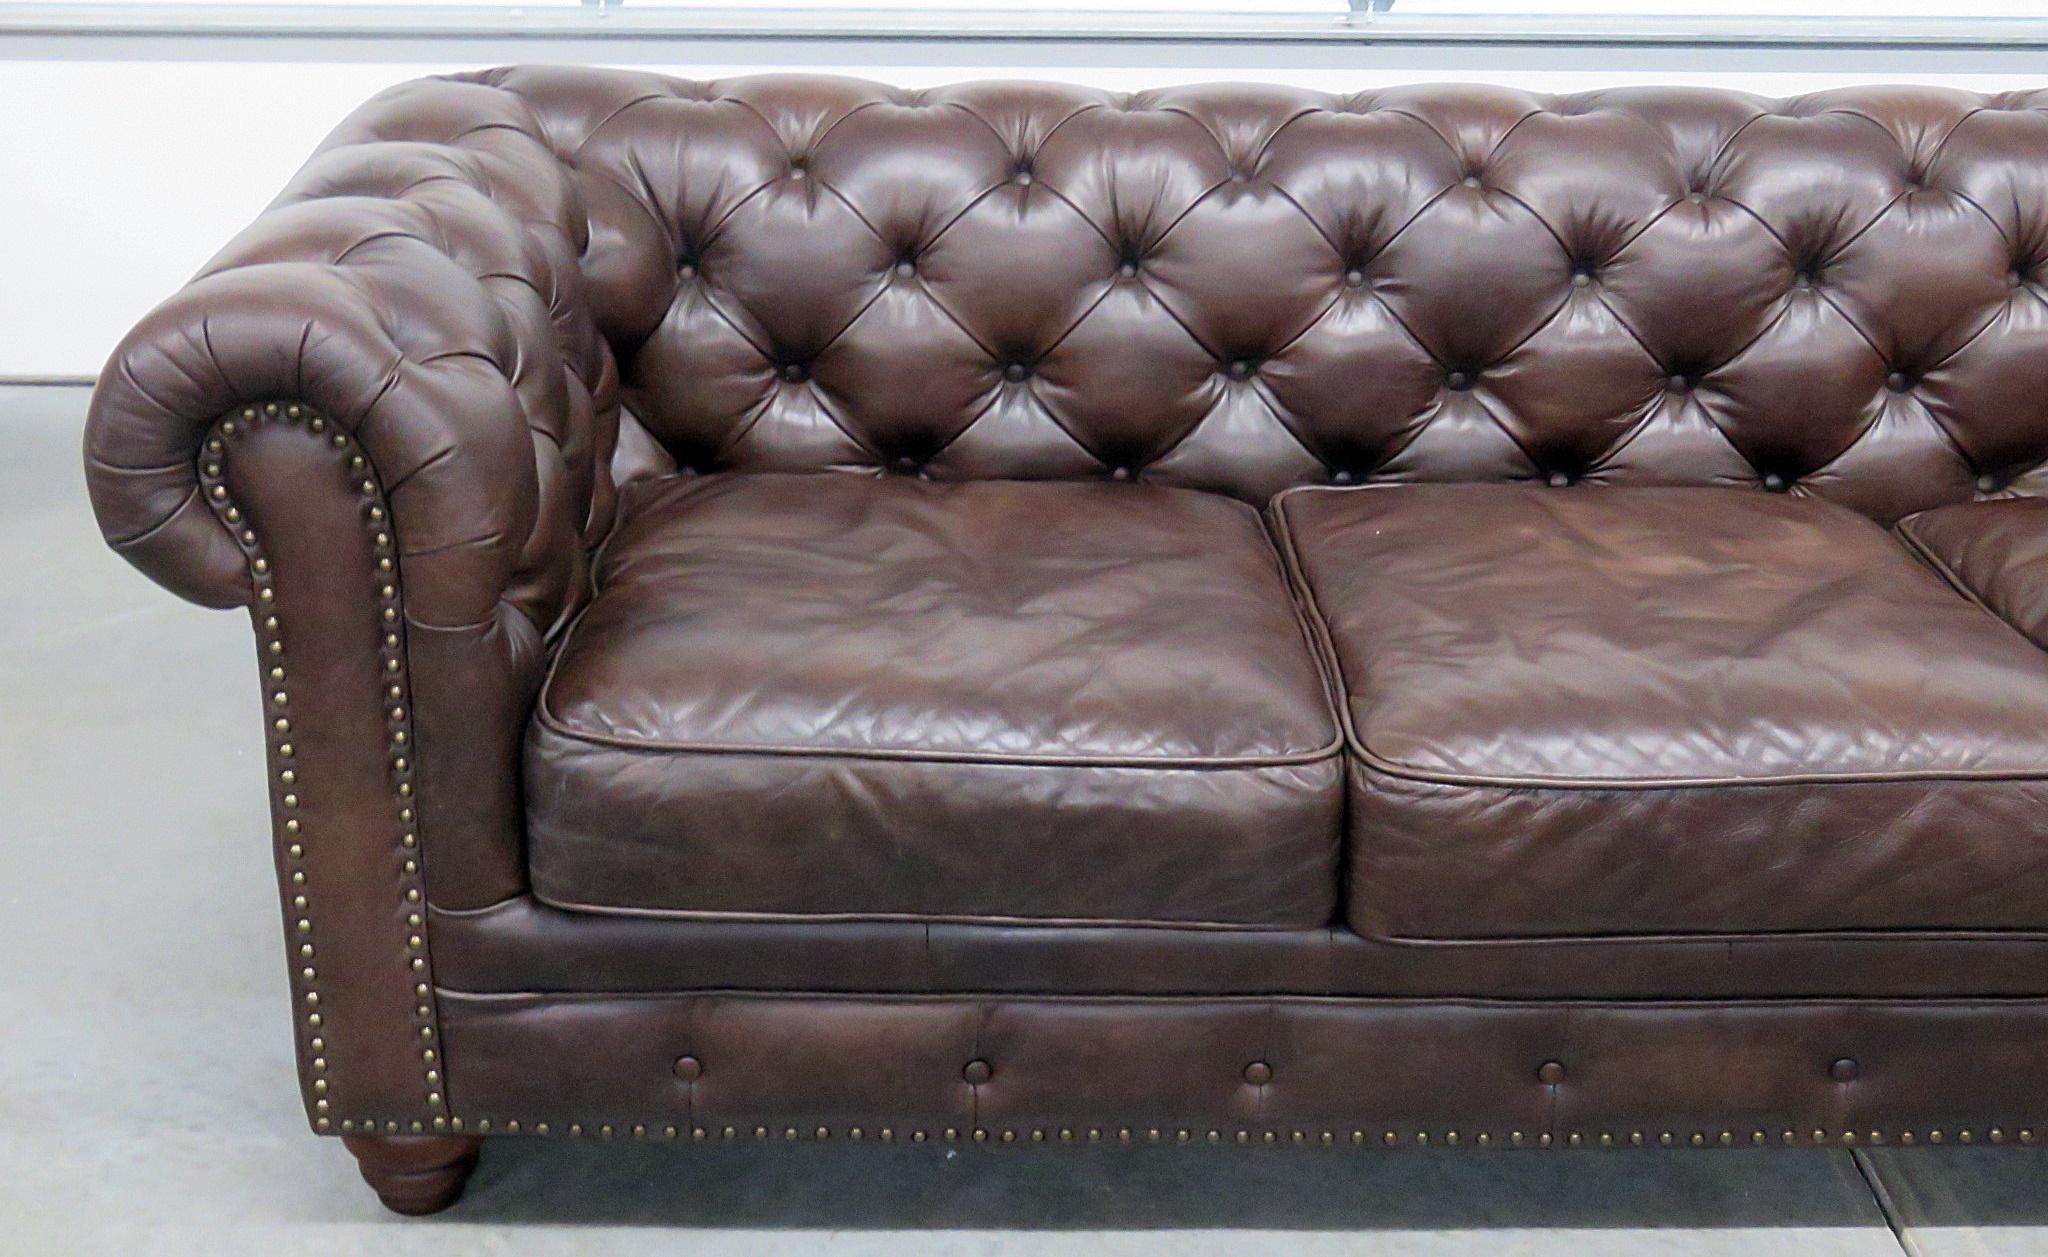 Tufted leather Chesterfield sofa with nailhead trim, attributed to Restoration Hardware.